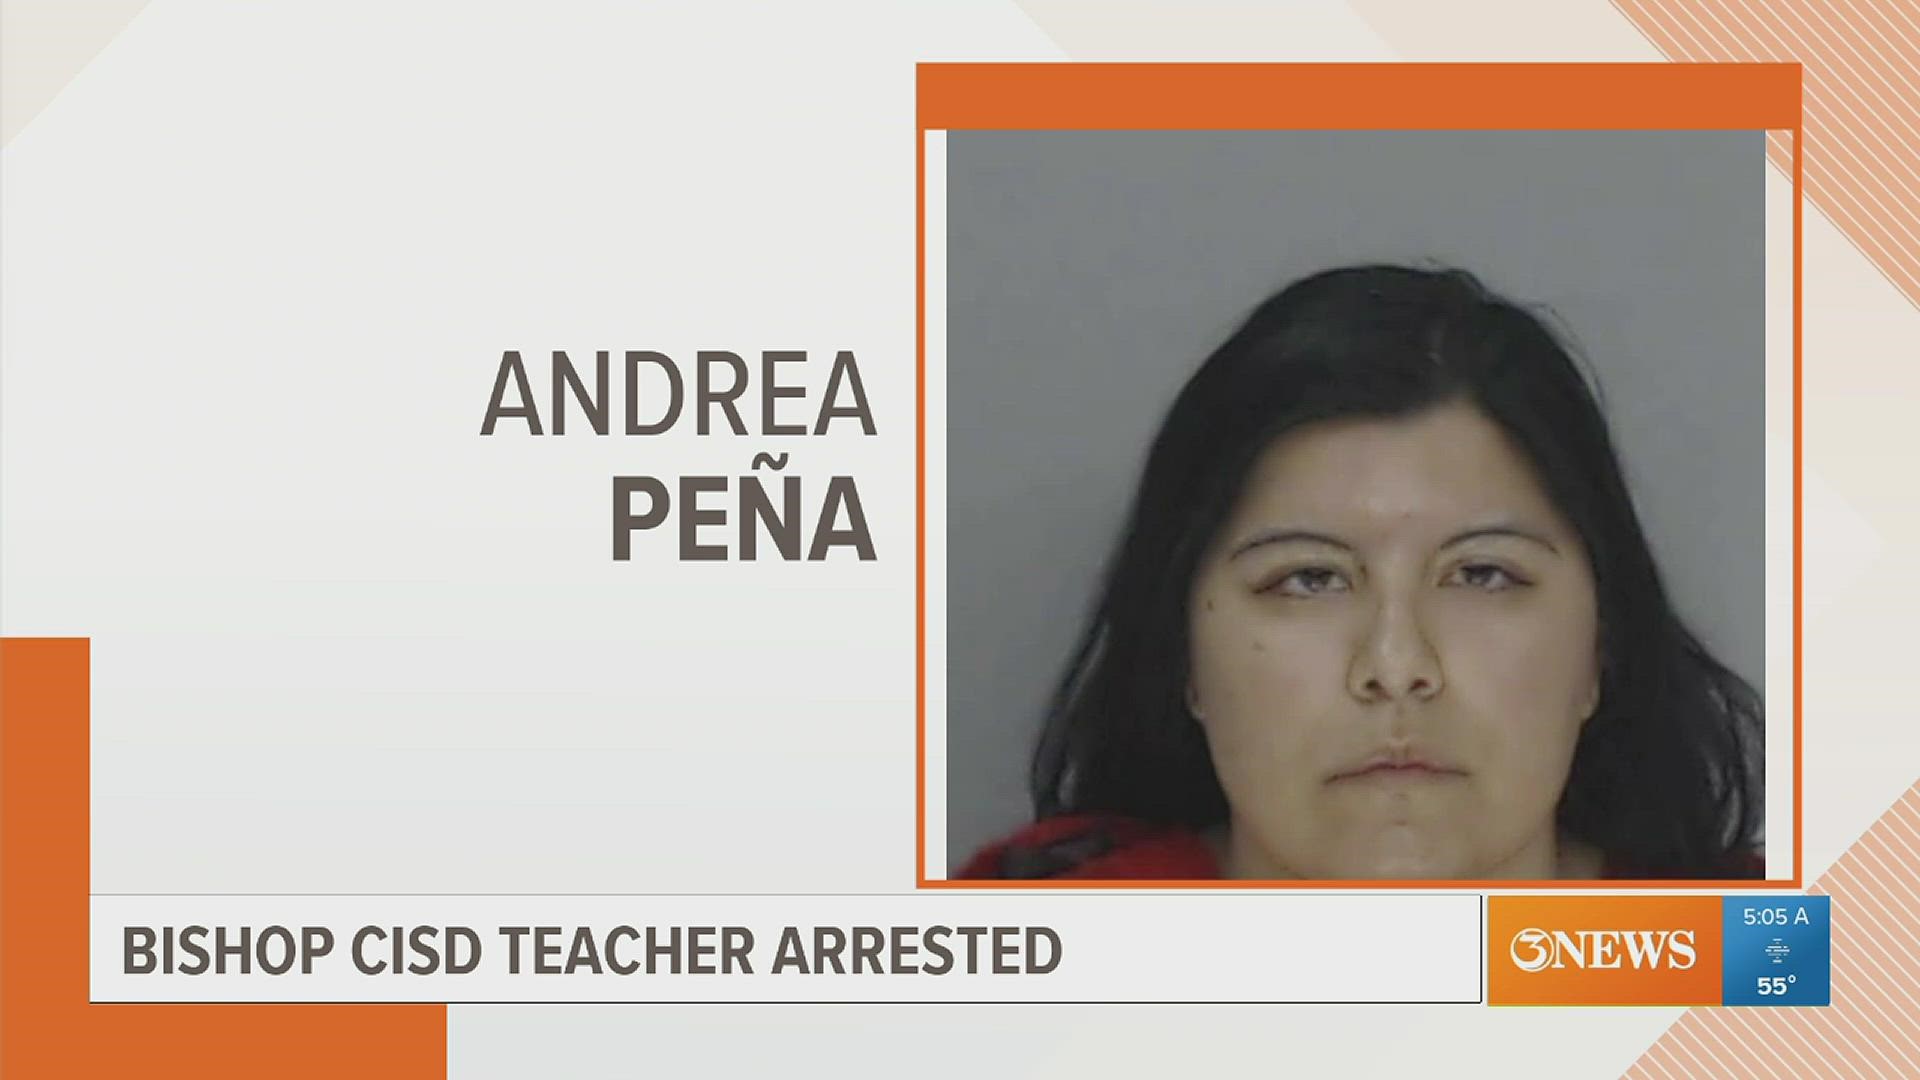 Former Bishop CISD teacher Andrea Peña, 28, is in the Nueces County Jail on a $210,000 bond, officials said.